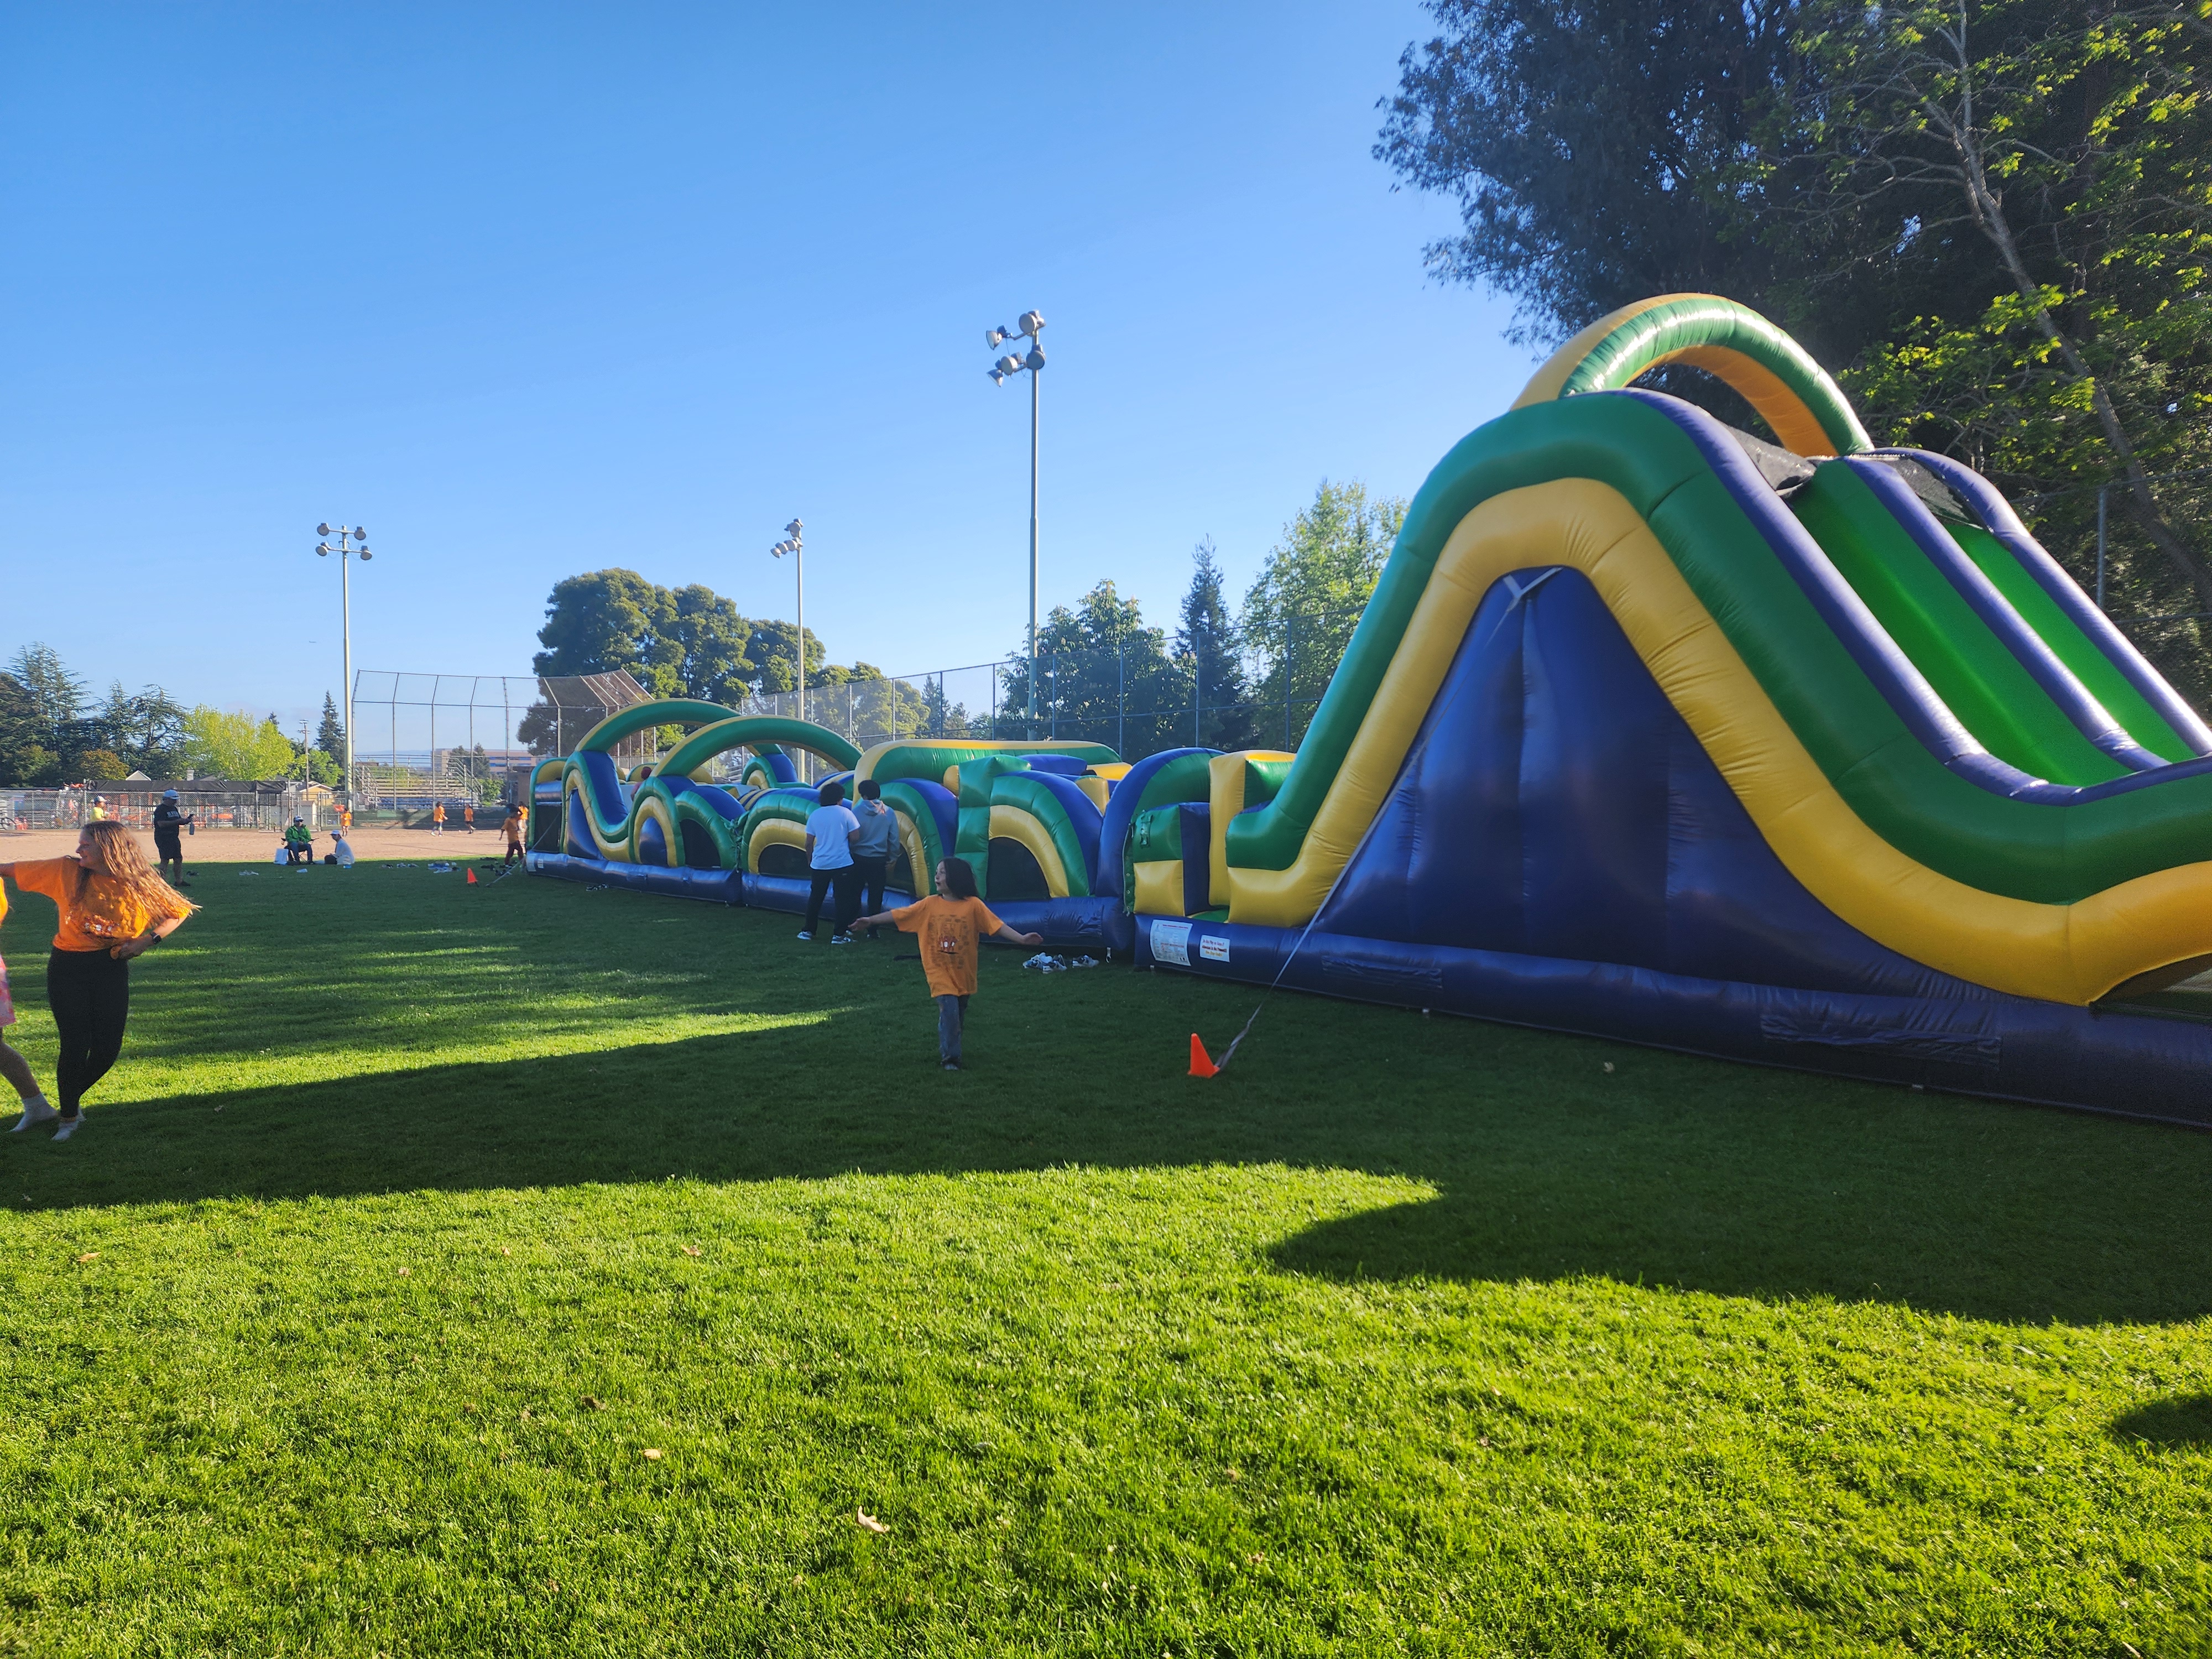 prime-time-interactive-inflatable-carnival-games-bounce-house-rentals-castro-valley-94546